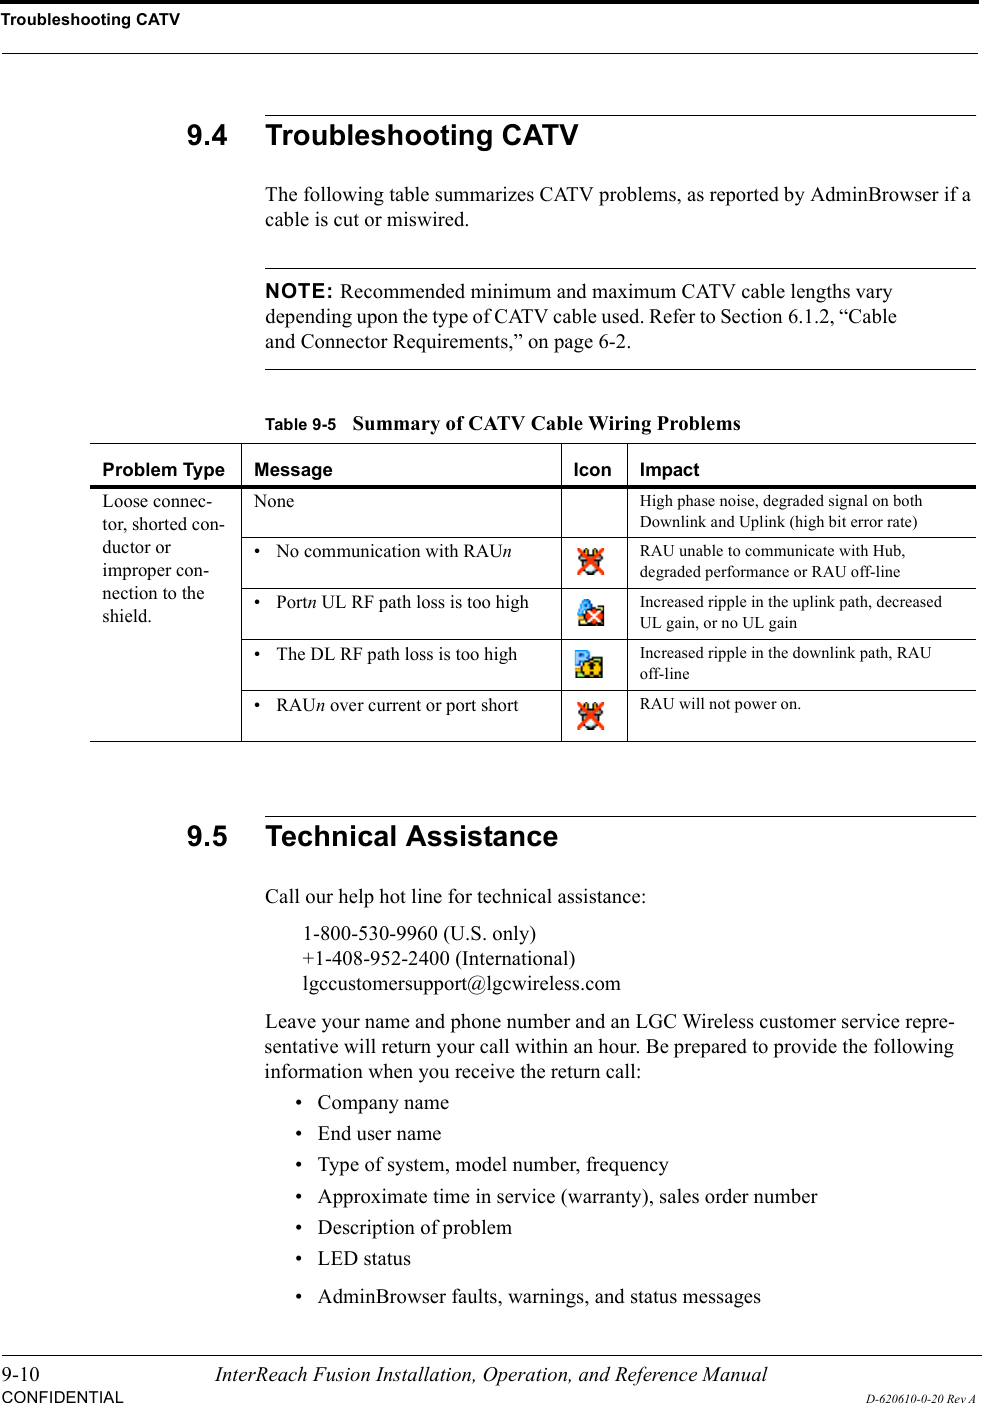 Troubleshooting CATV9-10 InterReach Fusion Installation, Operation, and Reference ManualCONFIDENTIALD-620610-0-20 Rev A9.4 Troubleshooting CATVThe following table summarizes CATV problems, as reported by AdminBrowser if a cable is cut or miswired.NOTE: Recommended minimum and maximum CATV cable lengths vary depending upon the type of CATV cable used. Refer to Section 6.1.2, “Cable and Connector Requirements,” on page 6-2.9.5 Technical AssistanceCall our help hot line for technical assistance:1-800-530-9960 (U.S. only)+1-408-952-2400 (International)lgccustomersupport@lgcwireless.comLeave your name and phone number and an LGC Wireless customer service repre-sentative will return your call within an hour. Be prepared to provide the following information when you receive the return call:• Company name• End user name• Type of system, model number, frequency• Approximate time in service (warranty), sales order number• Description of problem• LED status• AdminBrowser faults, warnings, and status messagesTable 9-5Summary of CATV Cable Wiring ProblemsProblem Type Message Icon ImpactLoose connec-tor, shorted con-ductor or improper con-nection to the shield.NoneHigh phase noise, degraded signal on both Downlink and Uplink (high bit error rate)• No communication with RAUn RAU unable to communicate with Hub, degraded performance or RAU off-line• Portn UL RF path loss is too highIncreased ripple in the uplink path, decreased UL gain, or no UL gain• The DL RF path loss is too highIncreased ripple in the downlink path, RAU off-line• RAUn over current or port shortRAU will not power on.